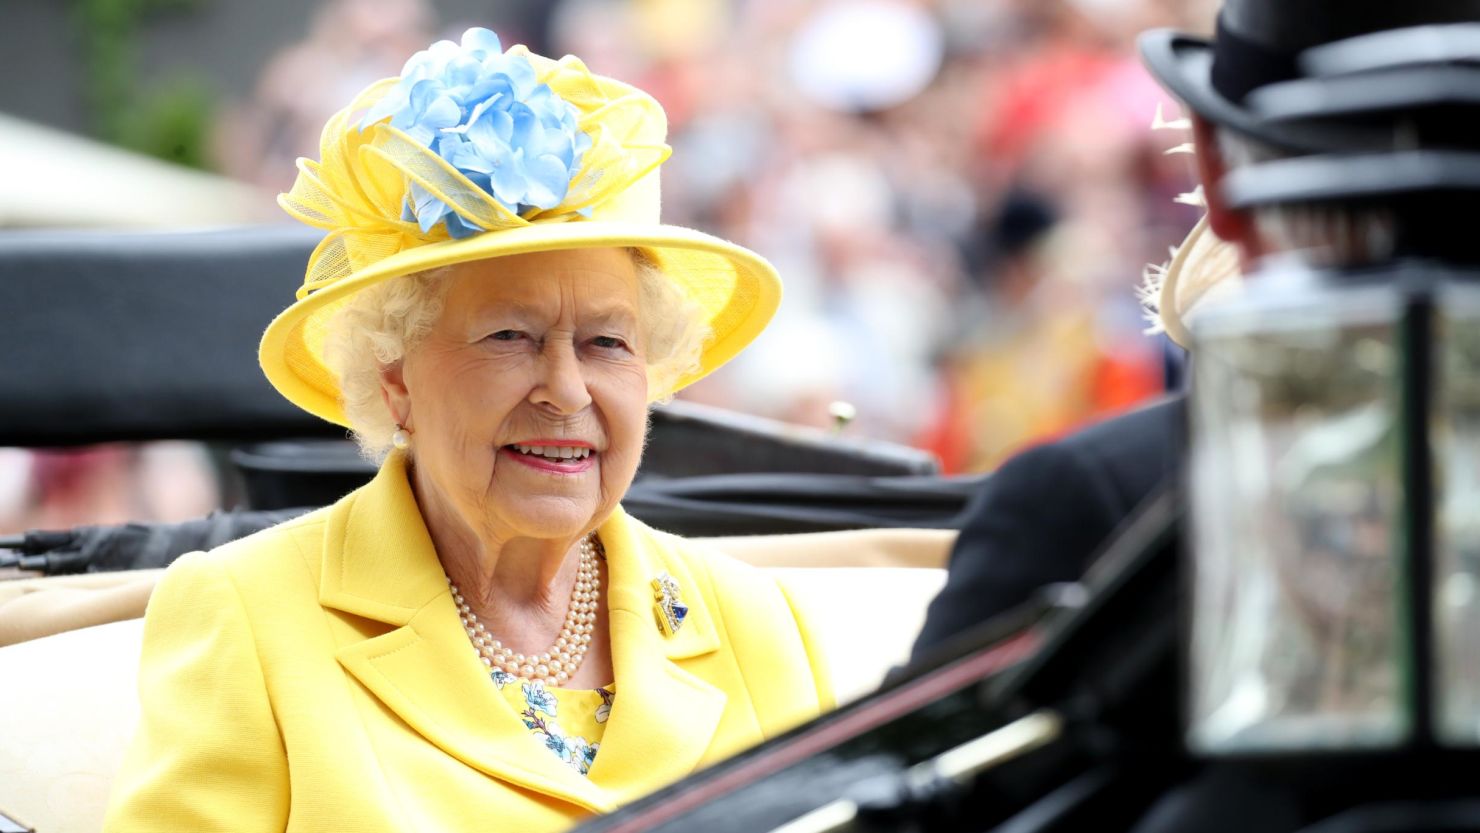 Queen Elizabeth II arrives by carriage to Royal Ascot Day 1 at Ascot Racecourse.